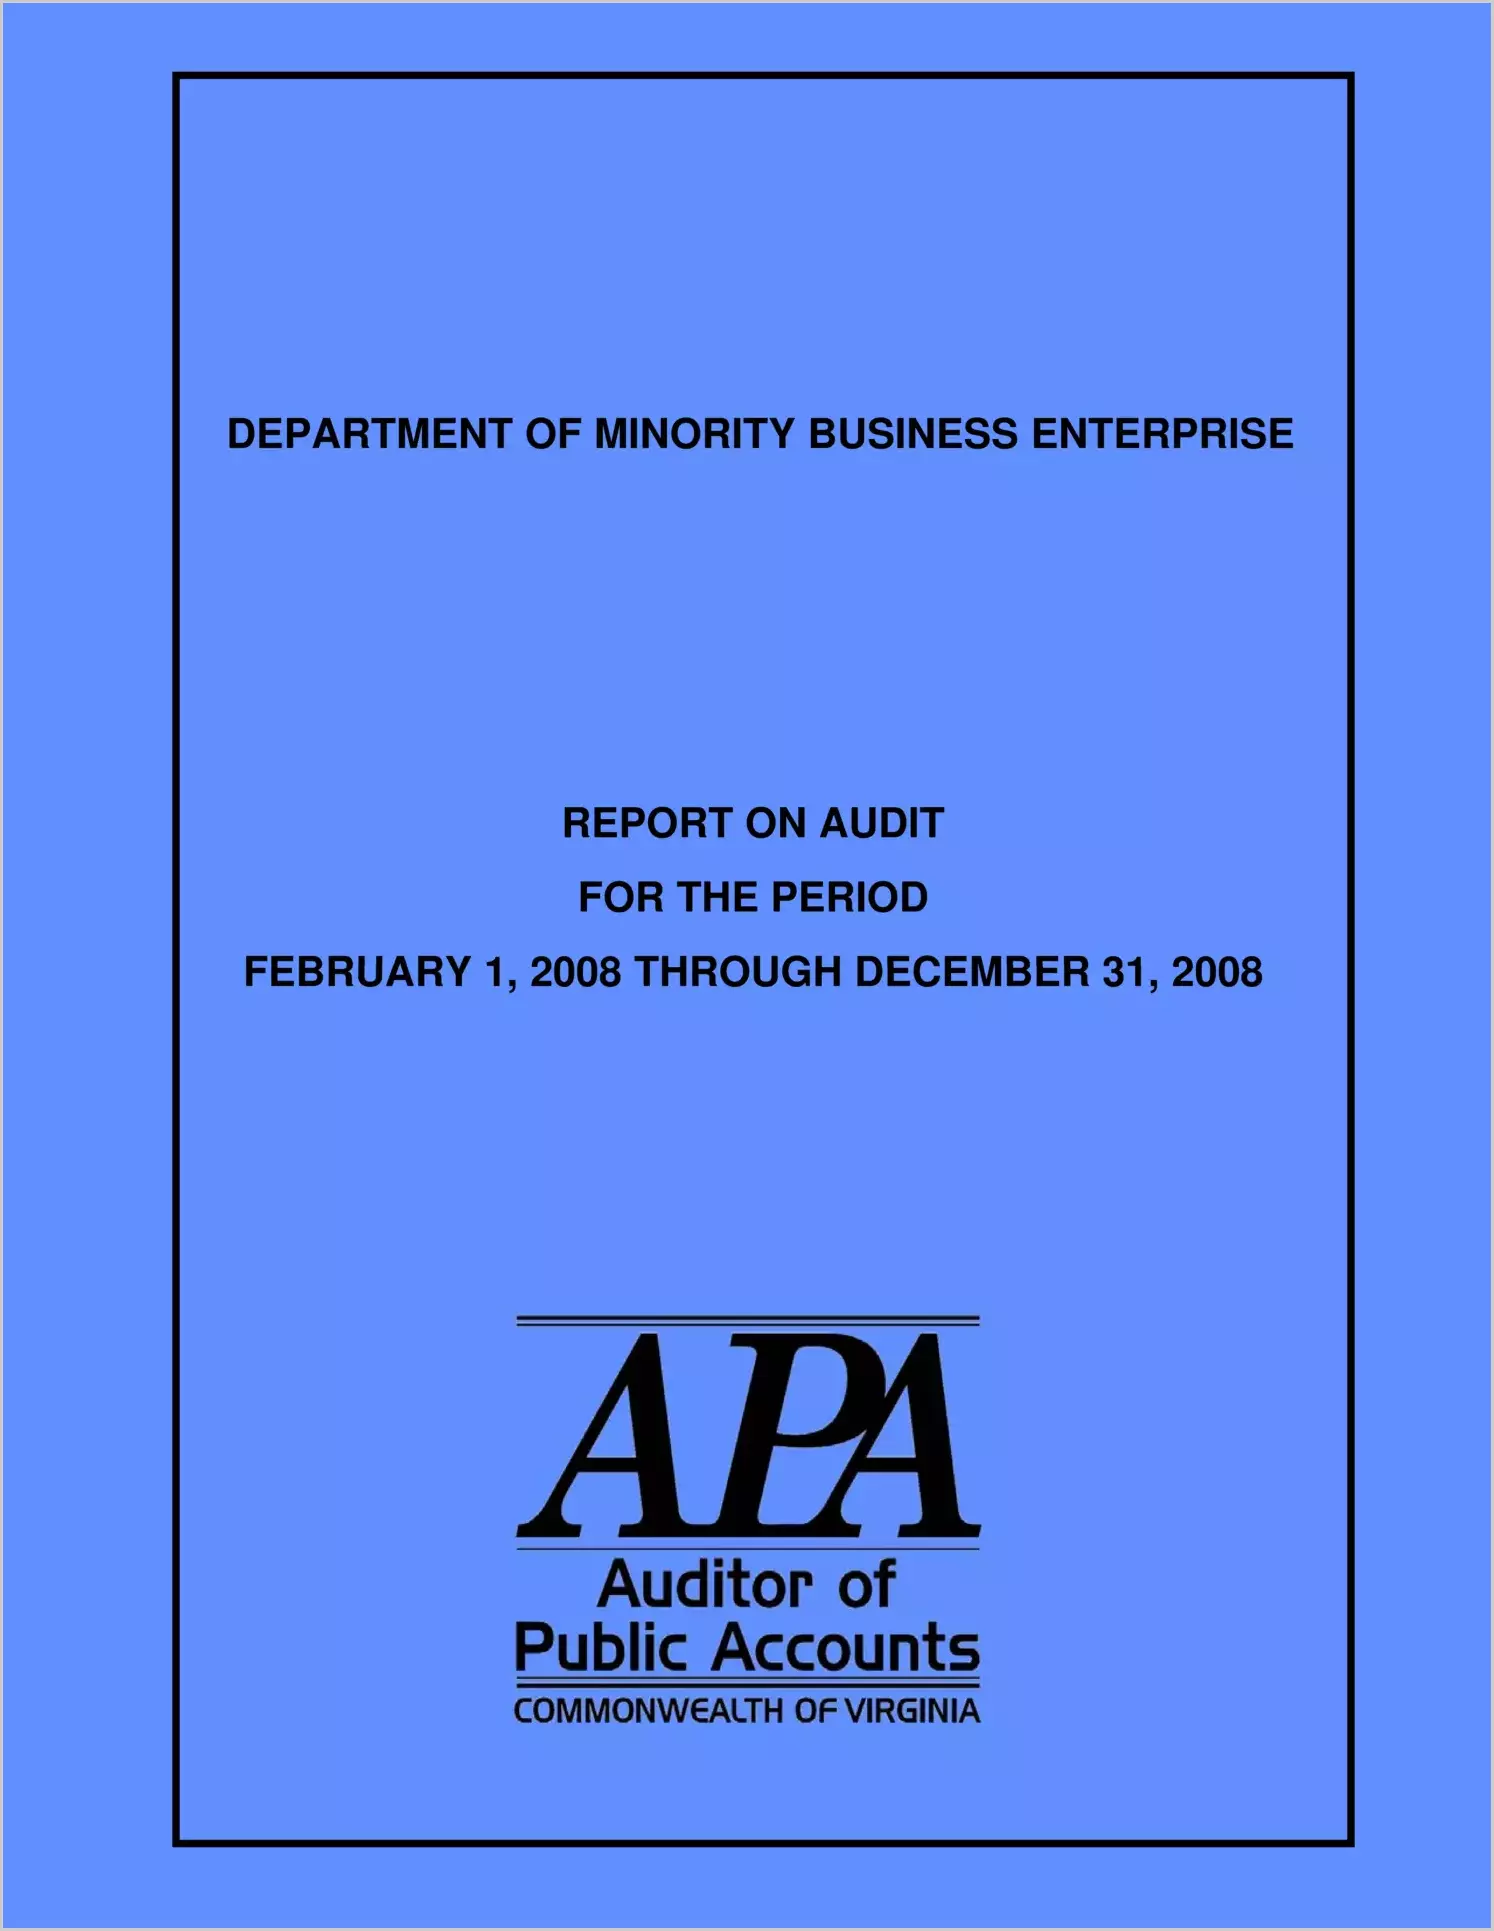 Department of Minority Business Enterprise report on audit for the period February 1, 2008 through December 31, 2008